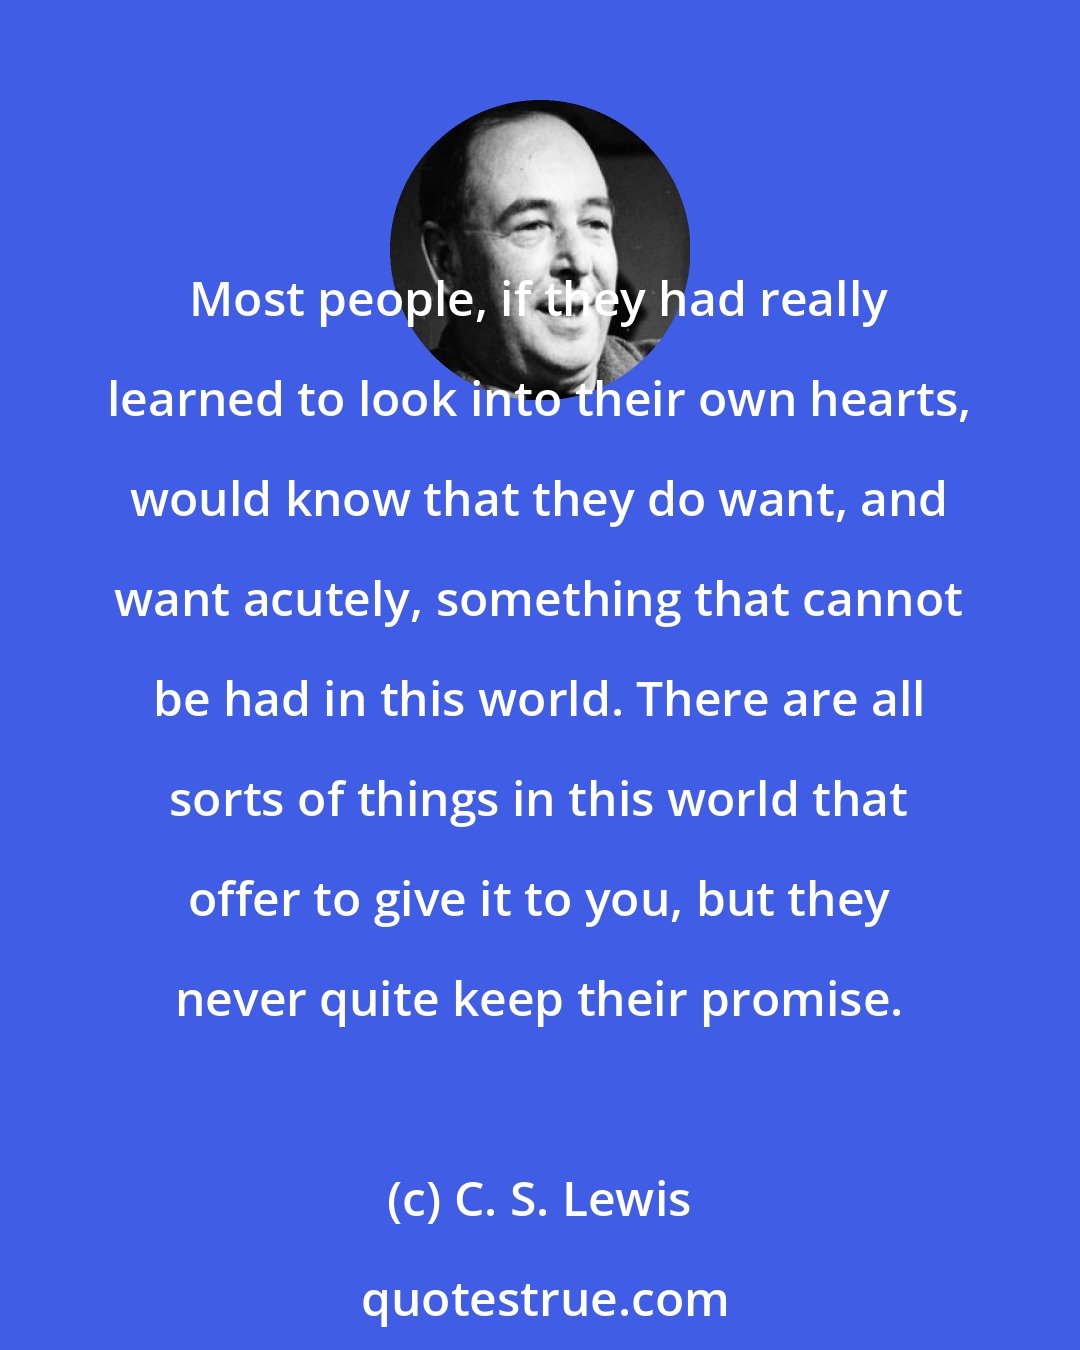 C. S. Lewis: Most people, if they had really learned to look into their own hearts, would know that they do want, and want acutely, something that cannot be had in this world. There are all sorts of things in this world that offer to give it to you, but they never quite keep their promise.